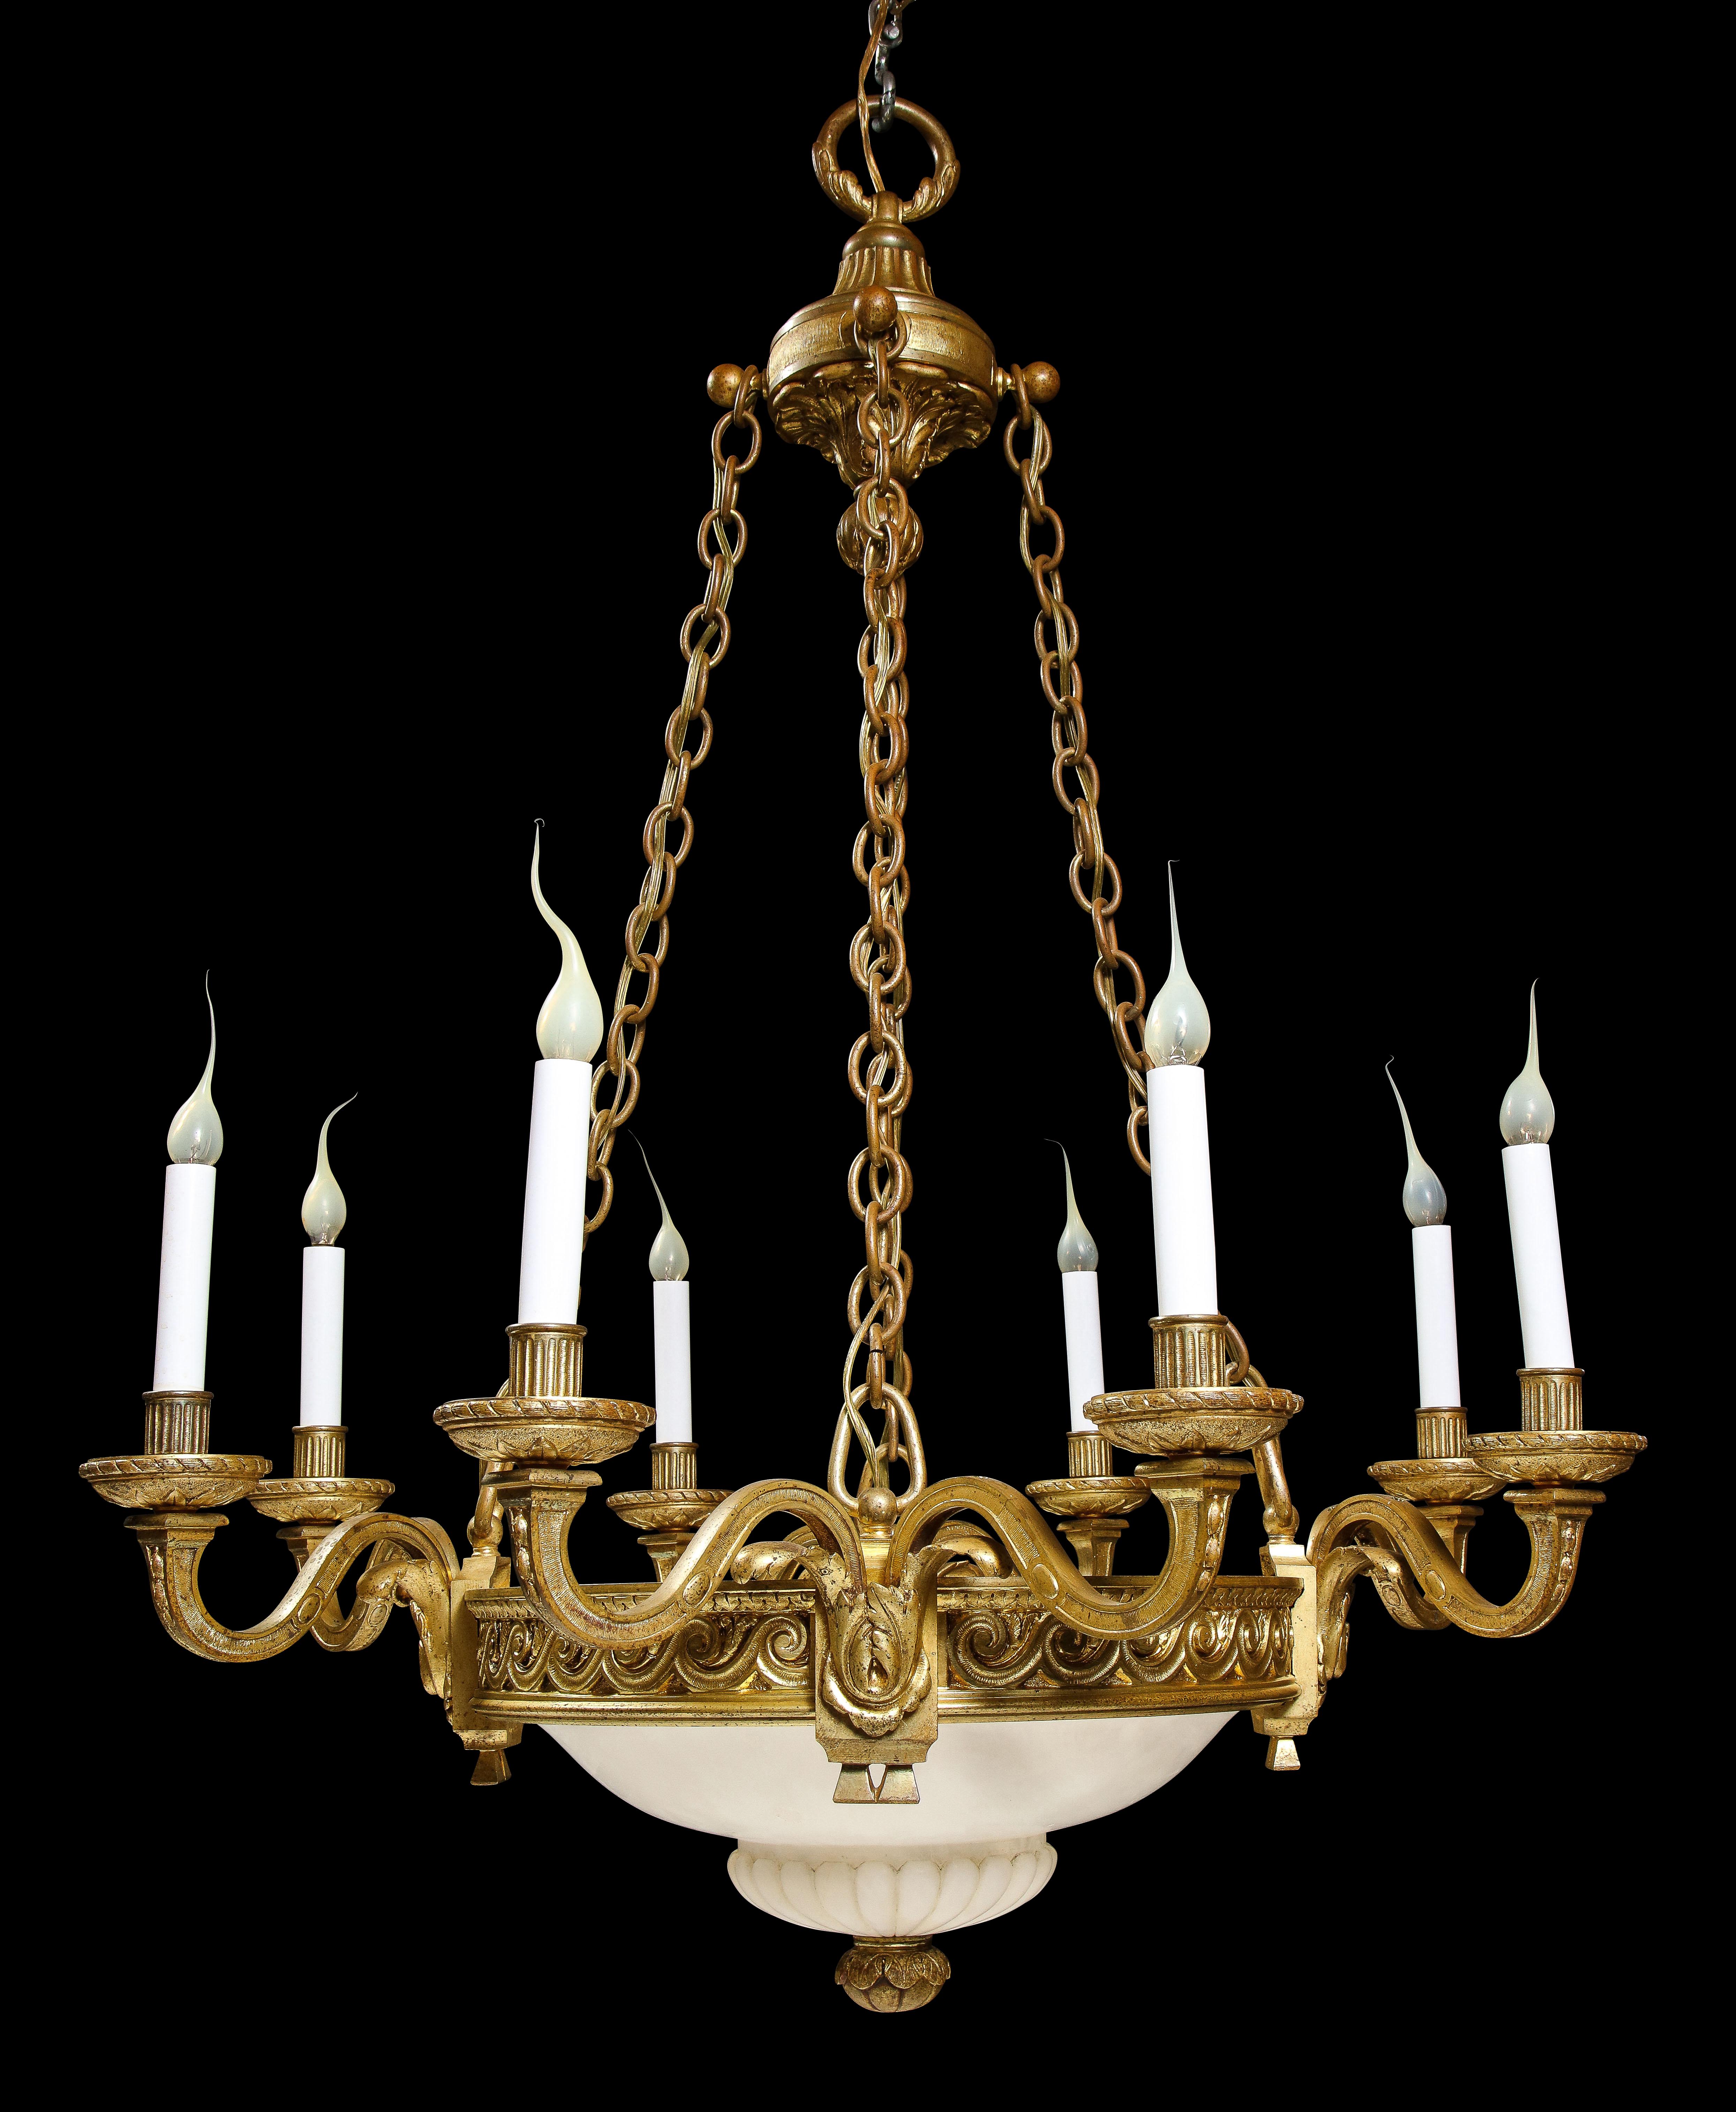 A Fine Antique French Louis XVI Style Gilt bronze and Hand carved alabaster multi light circular form chandelier of great quality. This unique chandelier is embellished with a very ornate hand carved circular alabaster dish decorated with a gilt